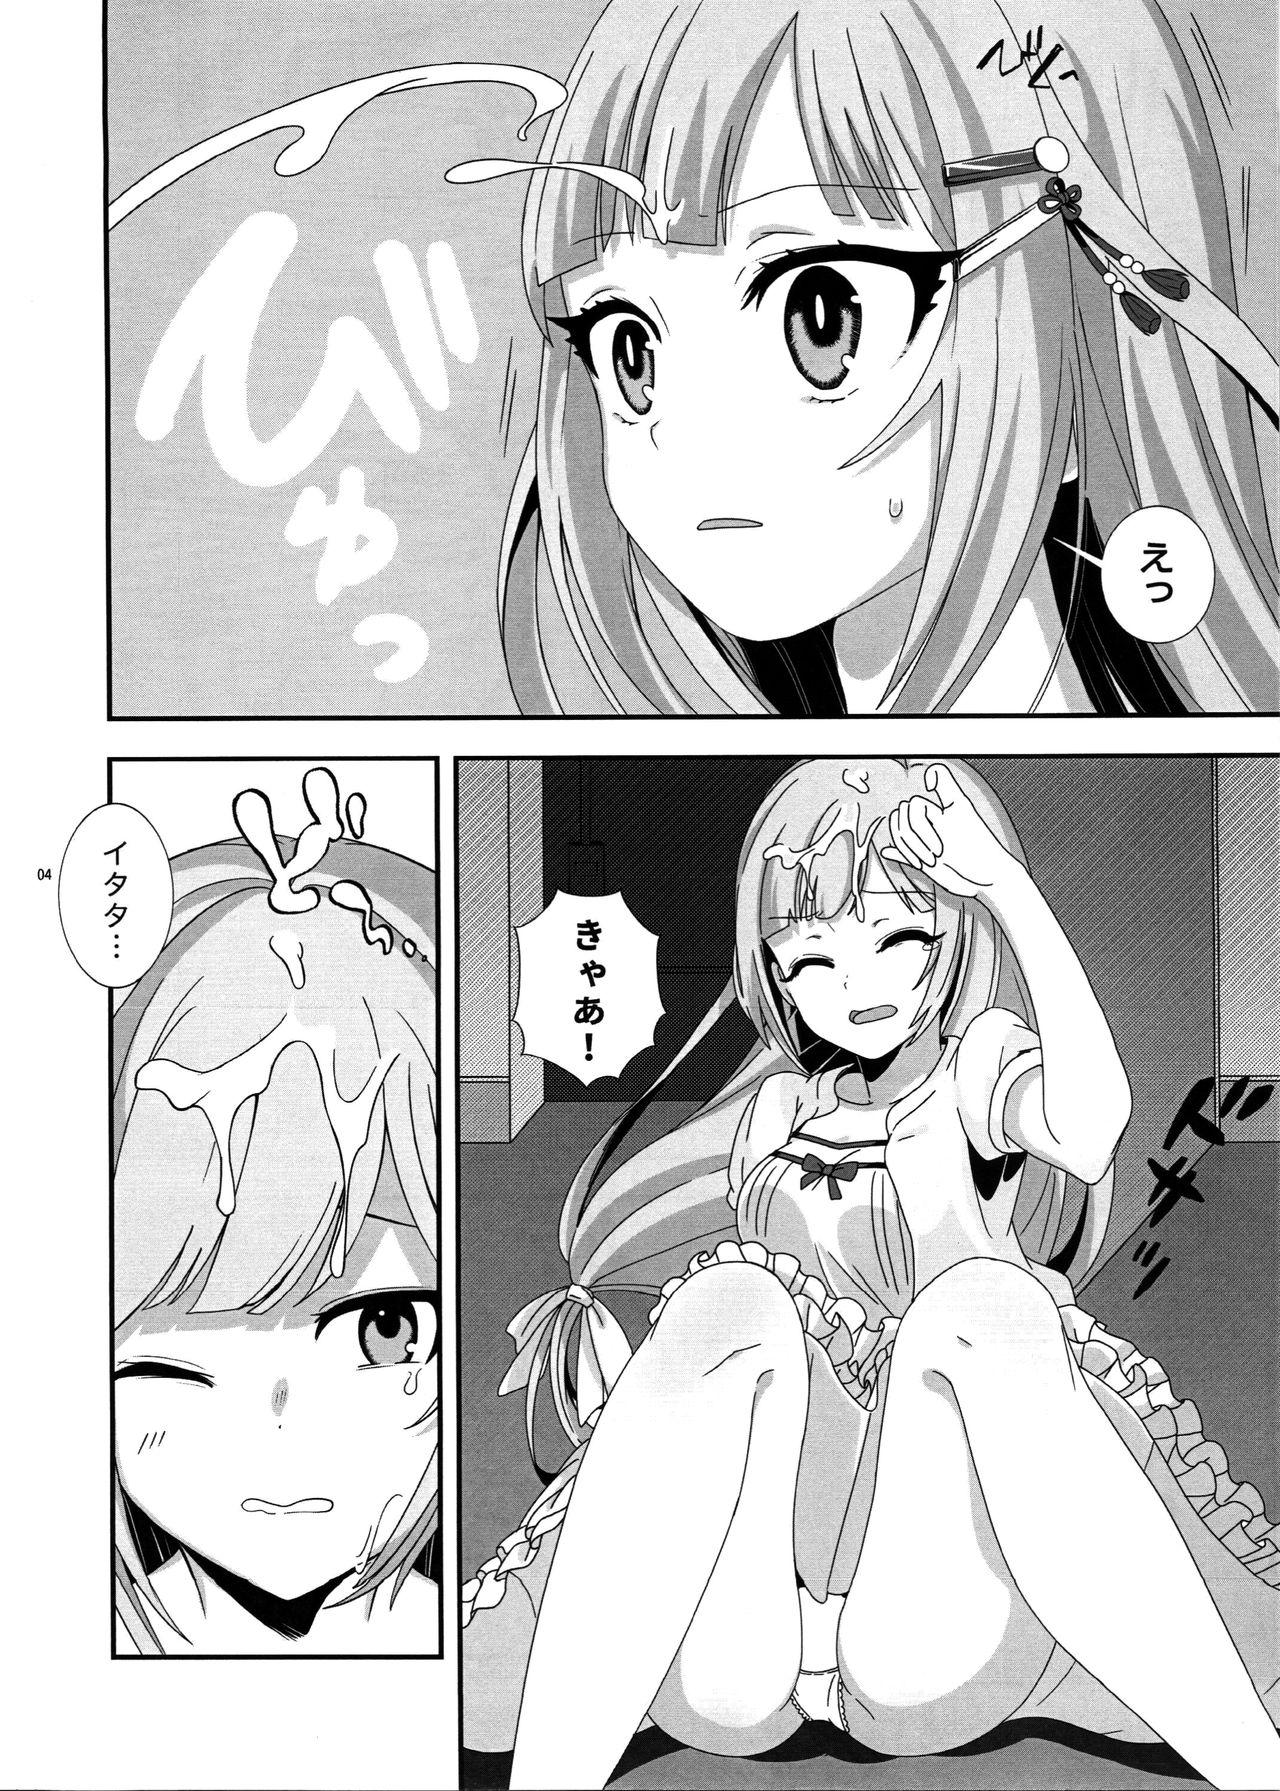 Outside SPARK - The idolmaster Punished - Page 5